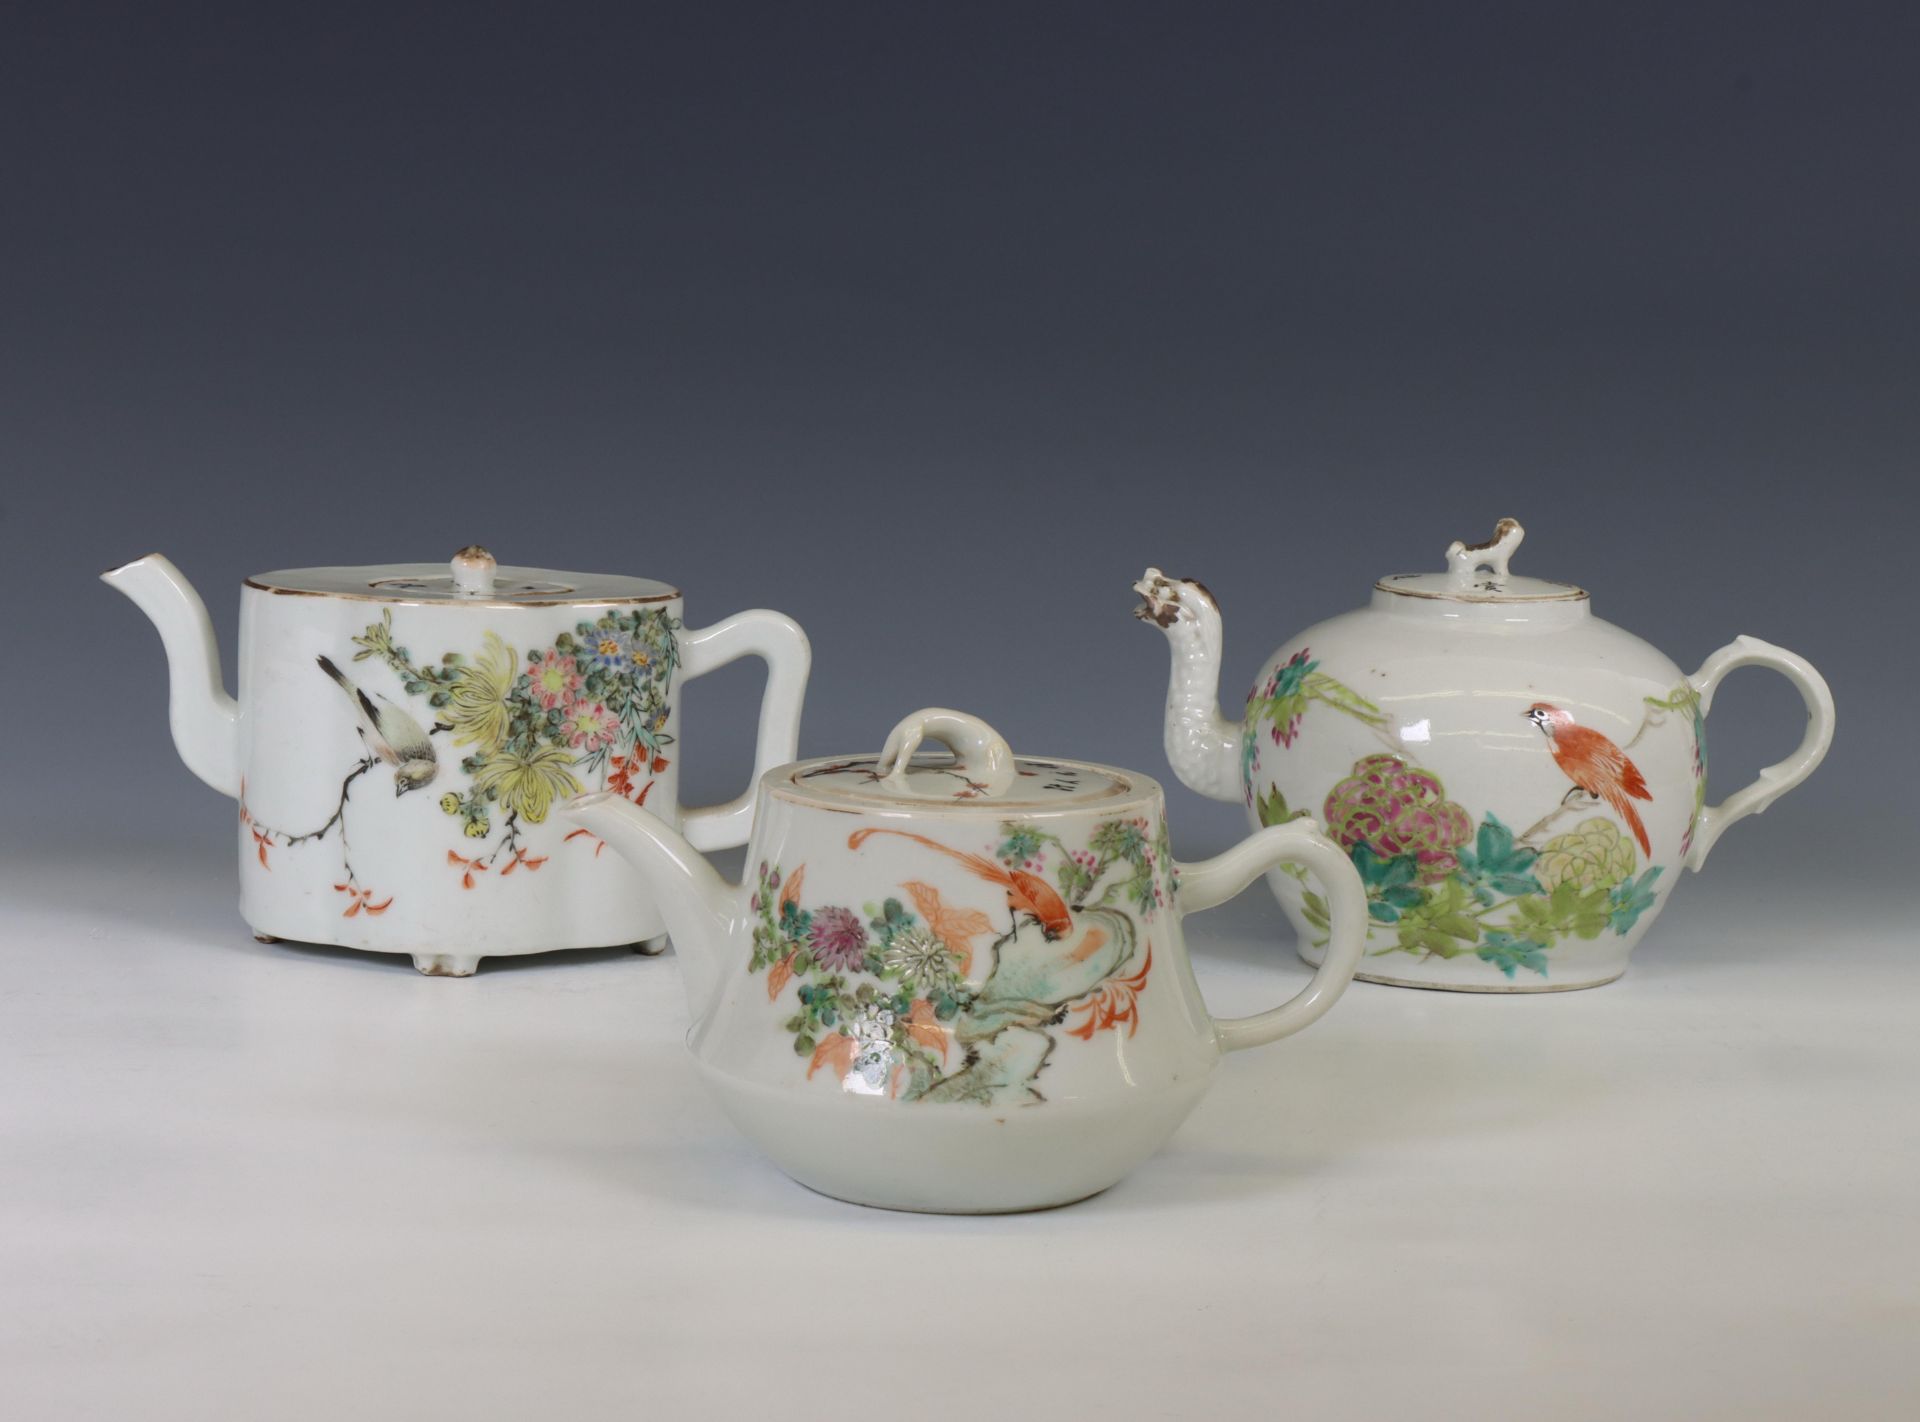 China, three famille rose porcelain teapots and covers, 20th century,